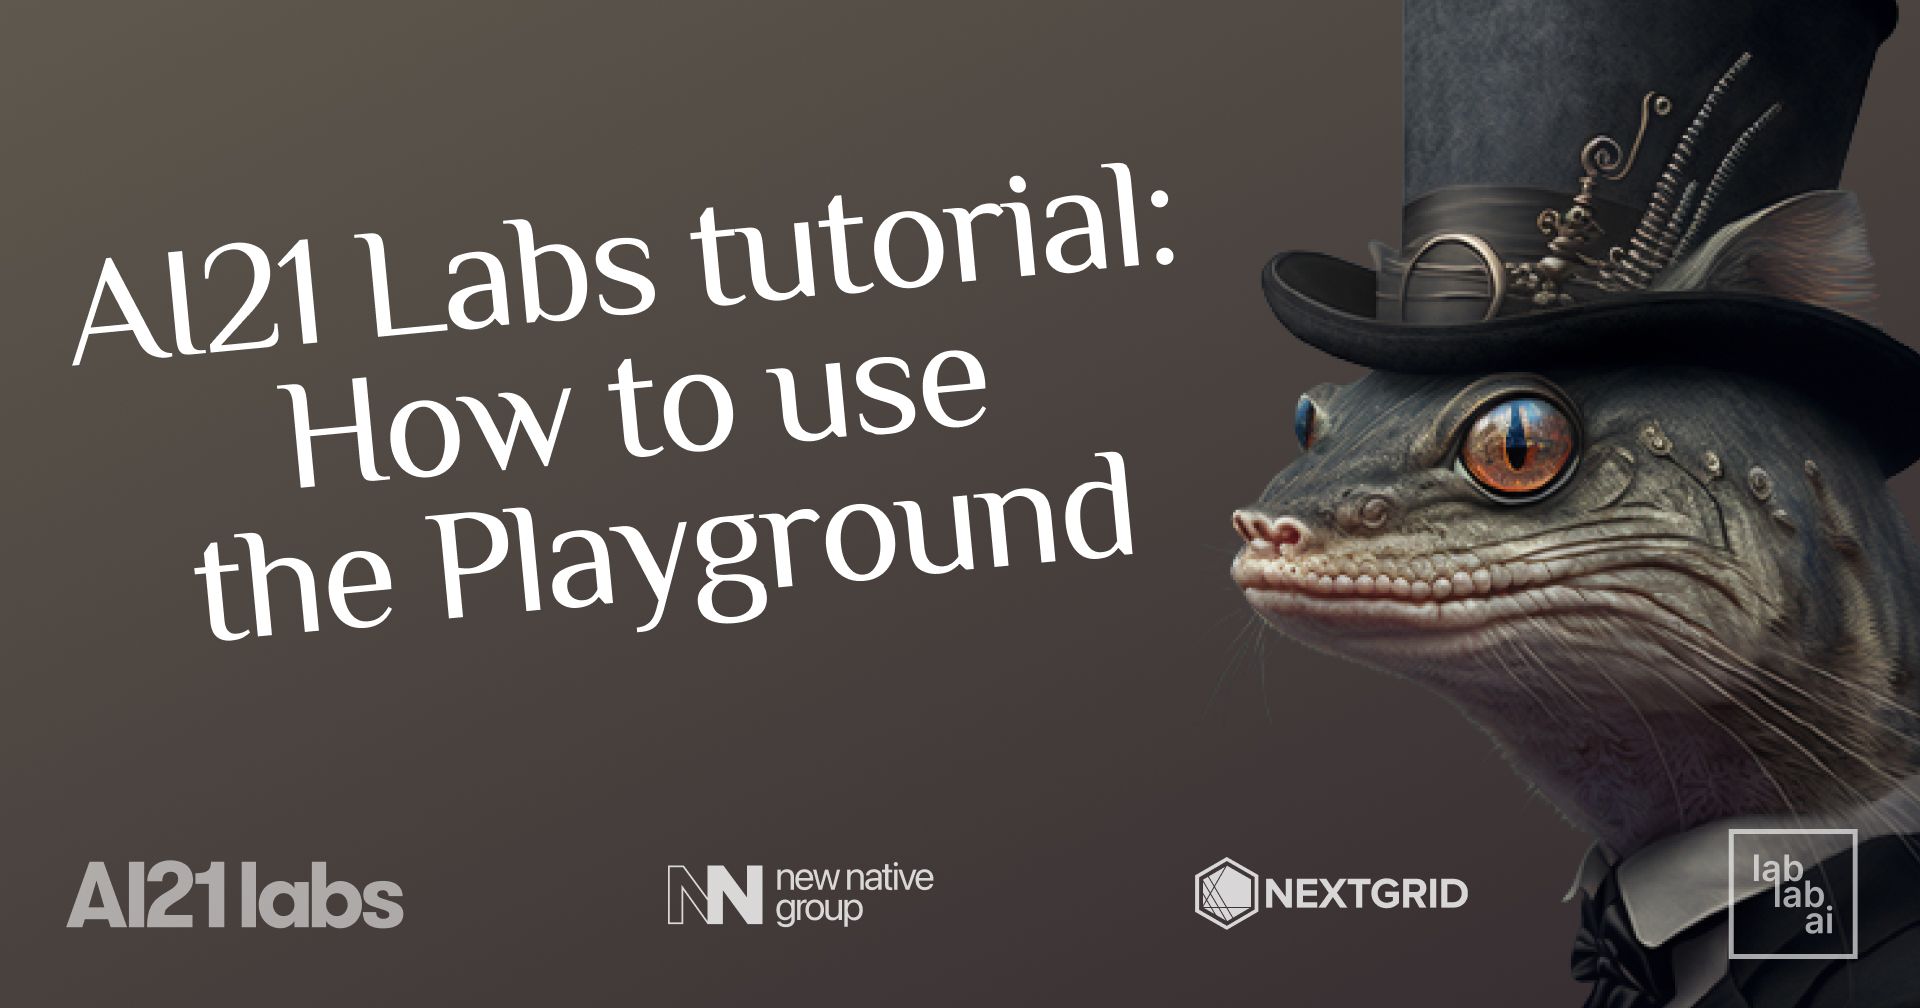 AI21 Labs tutorial: How to use the Playground